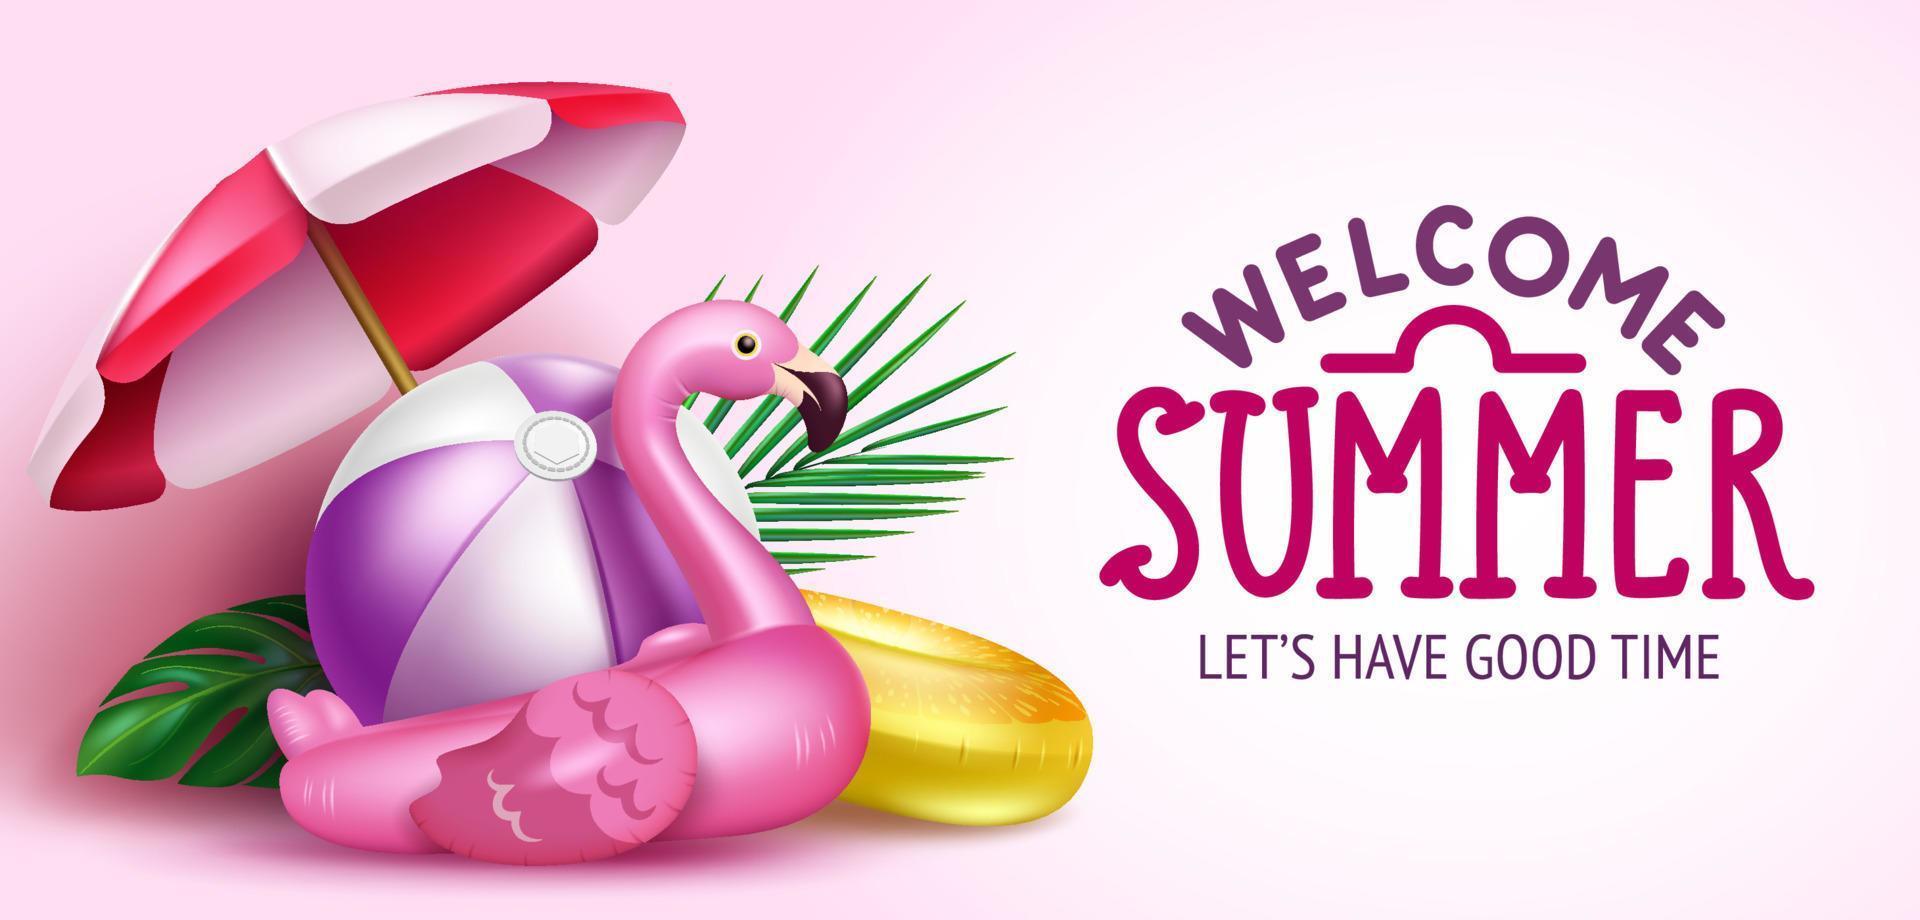 Summer holiday vector design. Welcome summer text in with beach ball, flamingo floaters and umbrella in pink background for tropical season relax and enjoy vacation. Vector illustration.